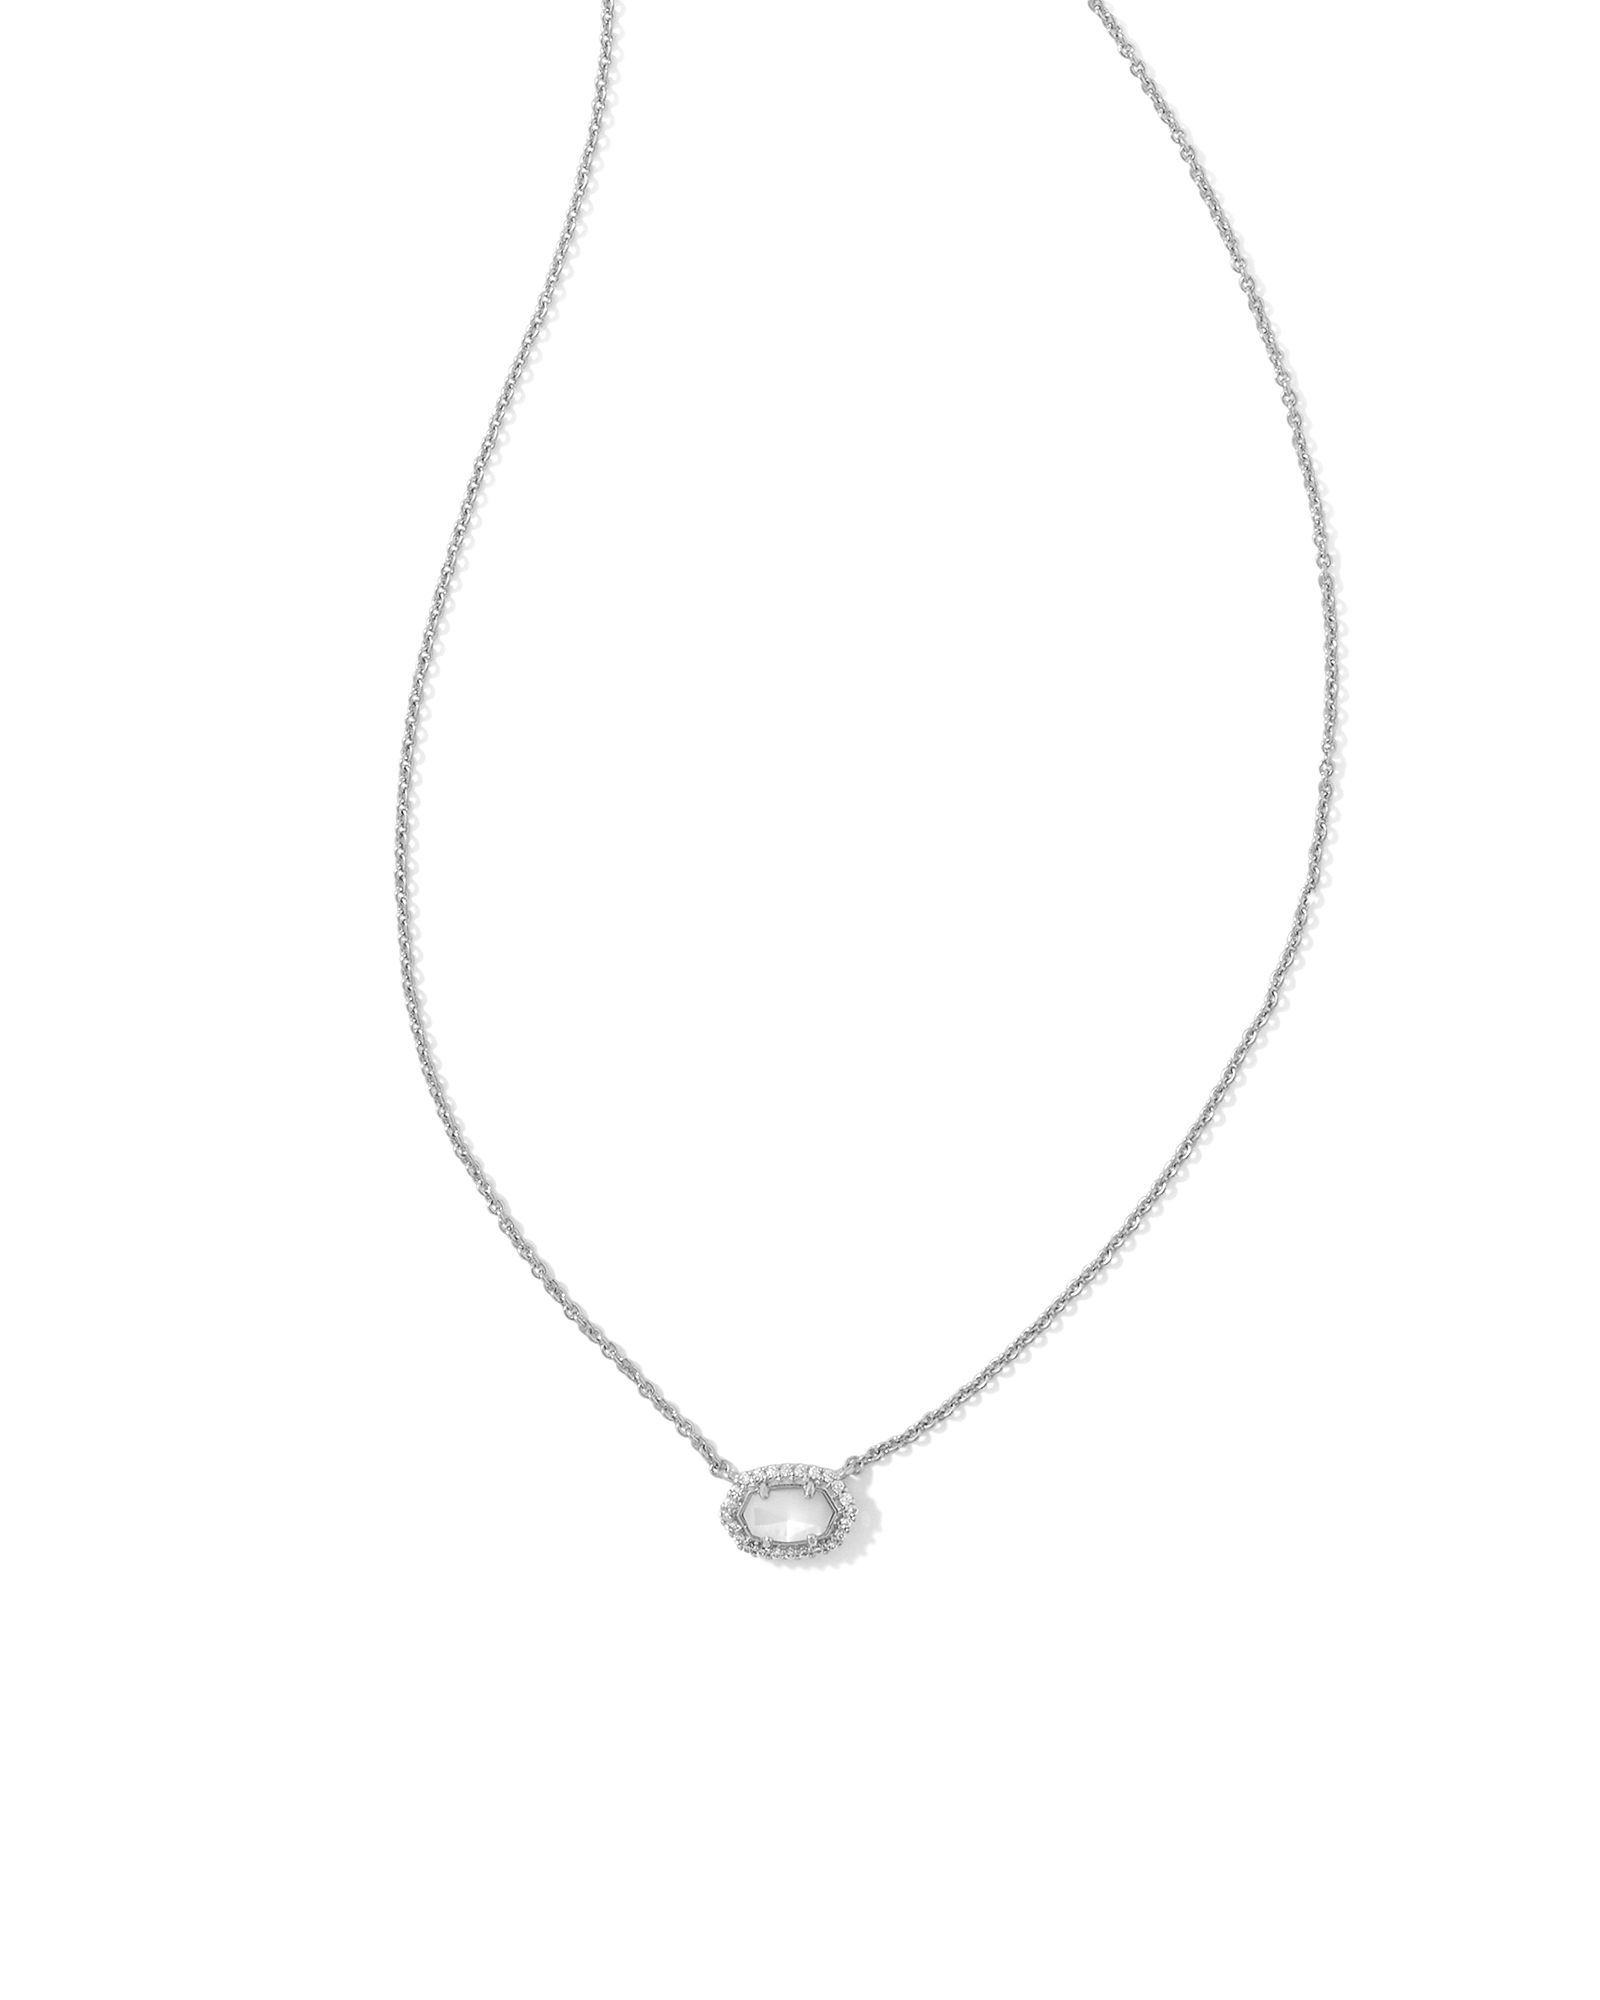 Chelsea Silver Pendant Necklace in Ivory Mother-of-Pearl | Kendra Scott | Kendra Scott